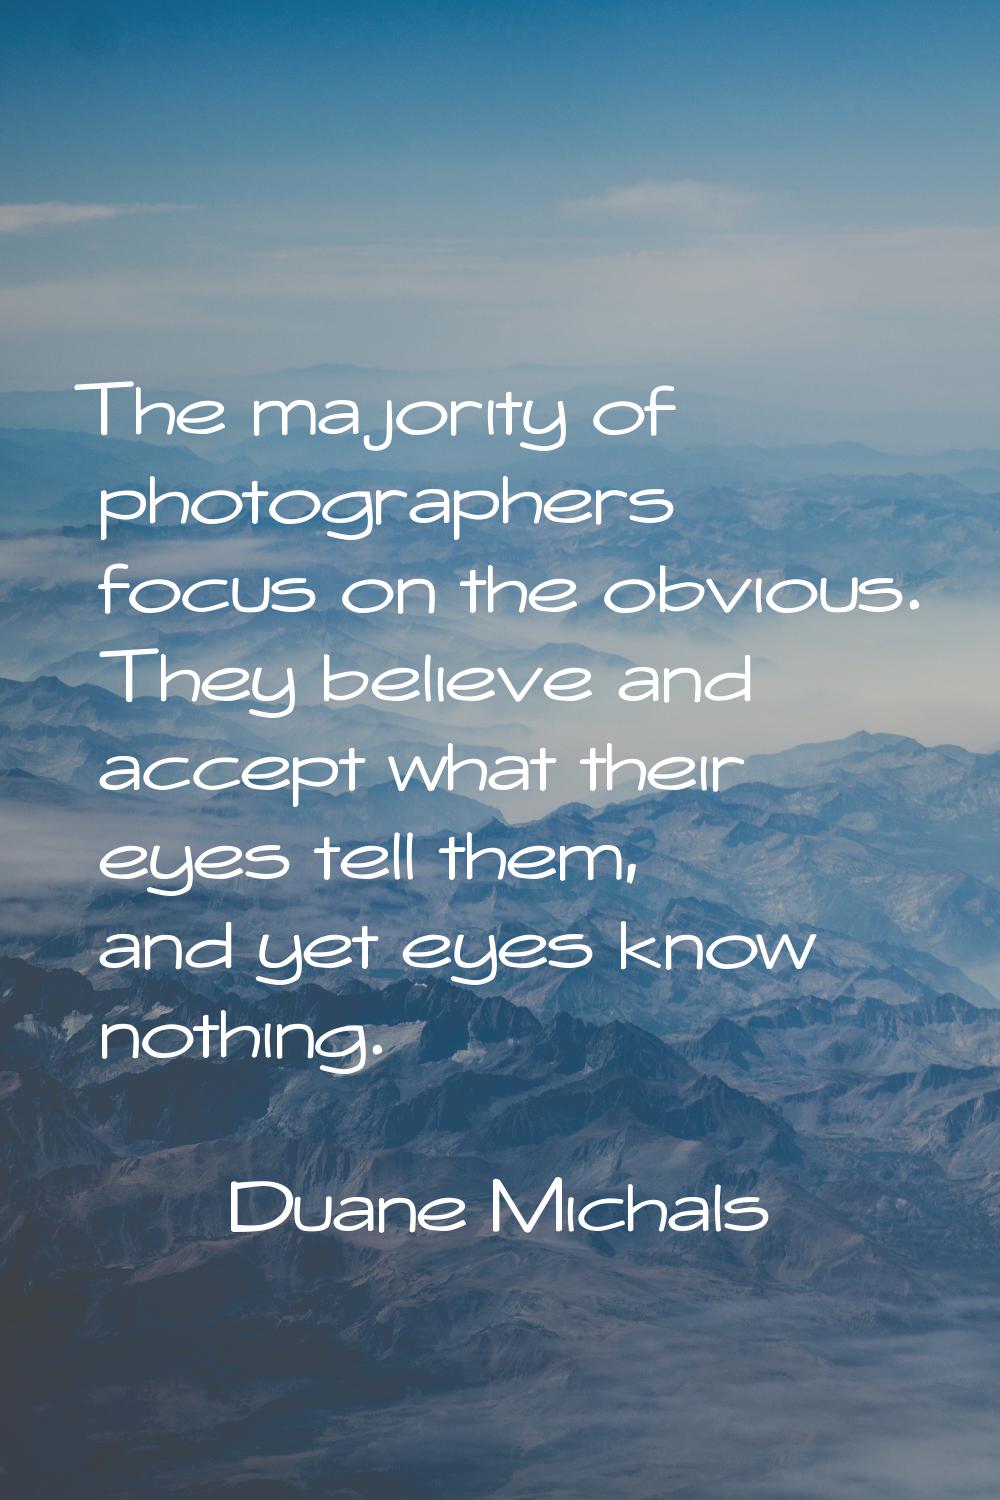 The majority of photographers focus on the obvious. They believe and accept what their eyes tell th